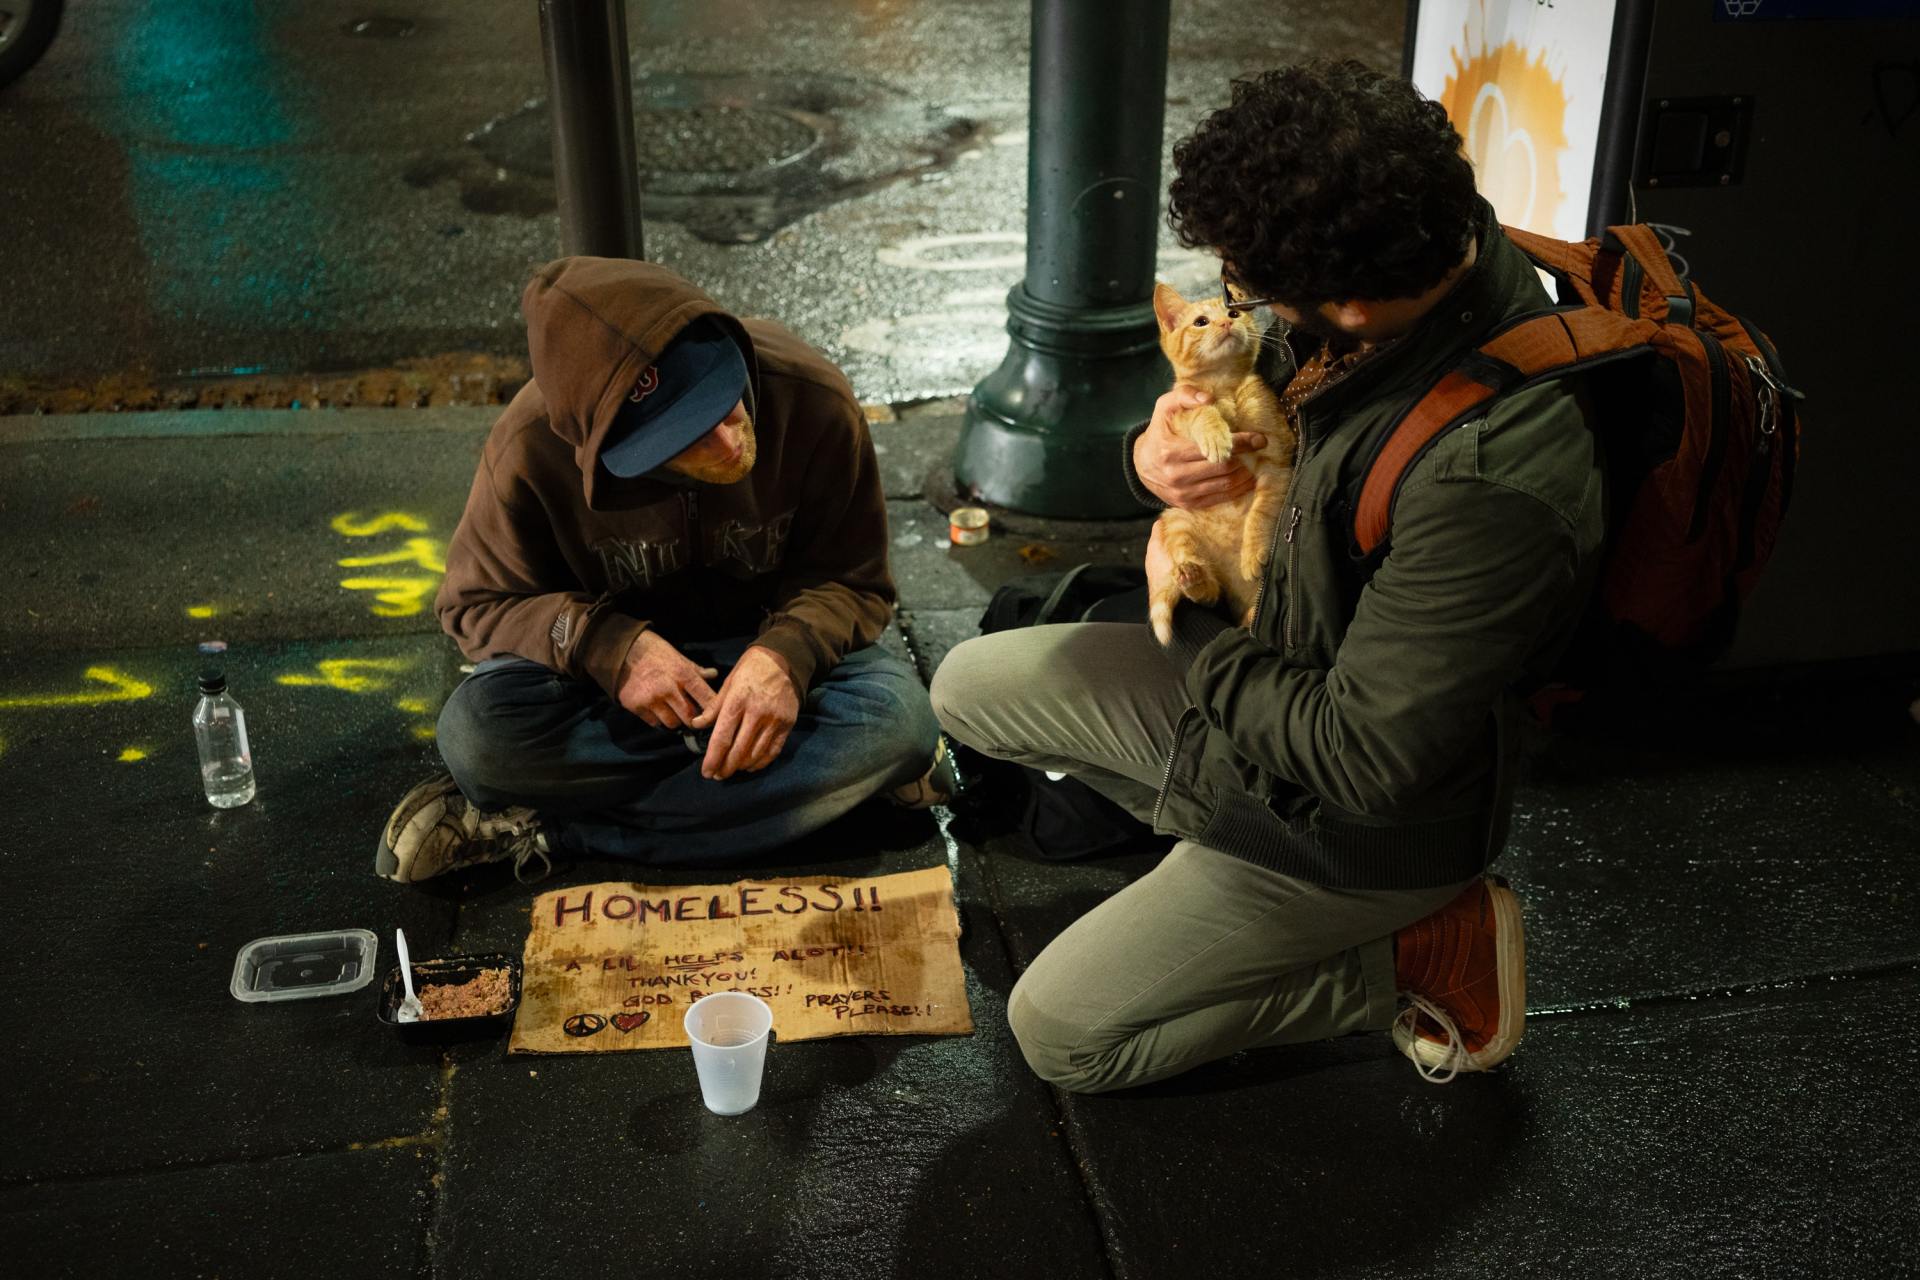 An individual with a cat talking to a homeless person